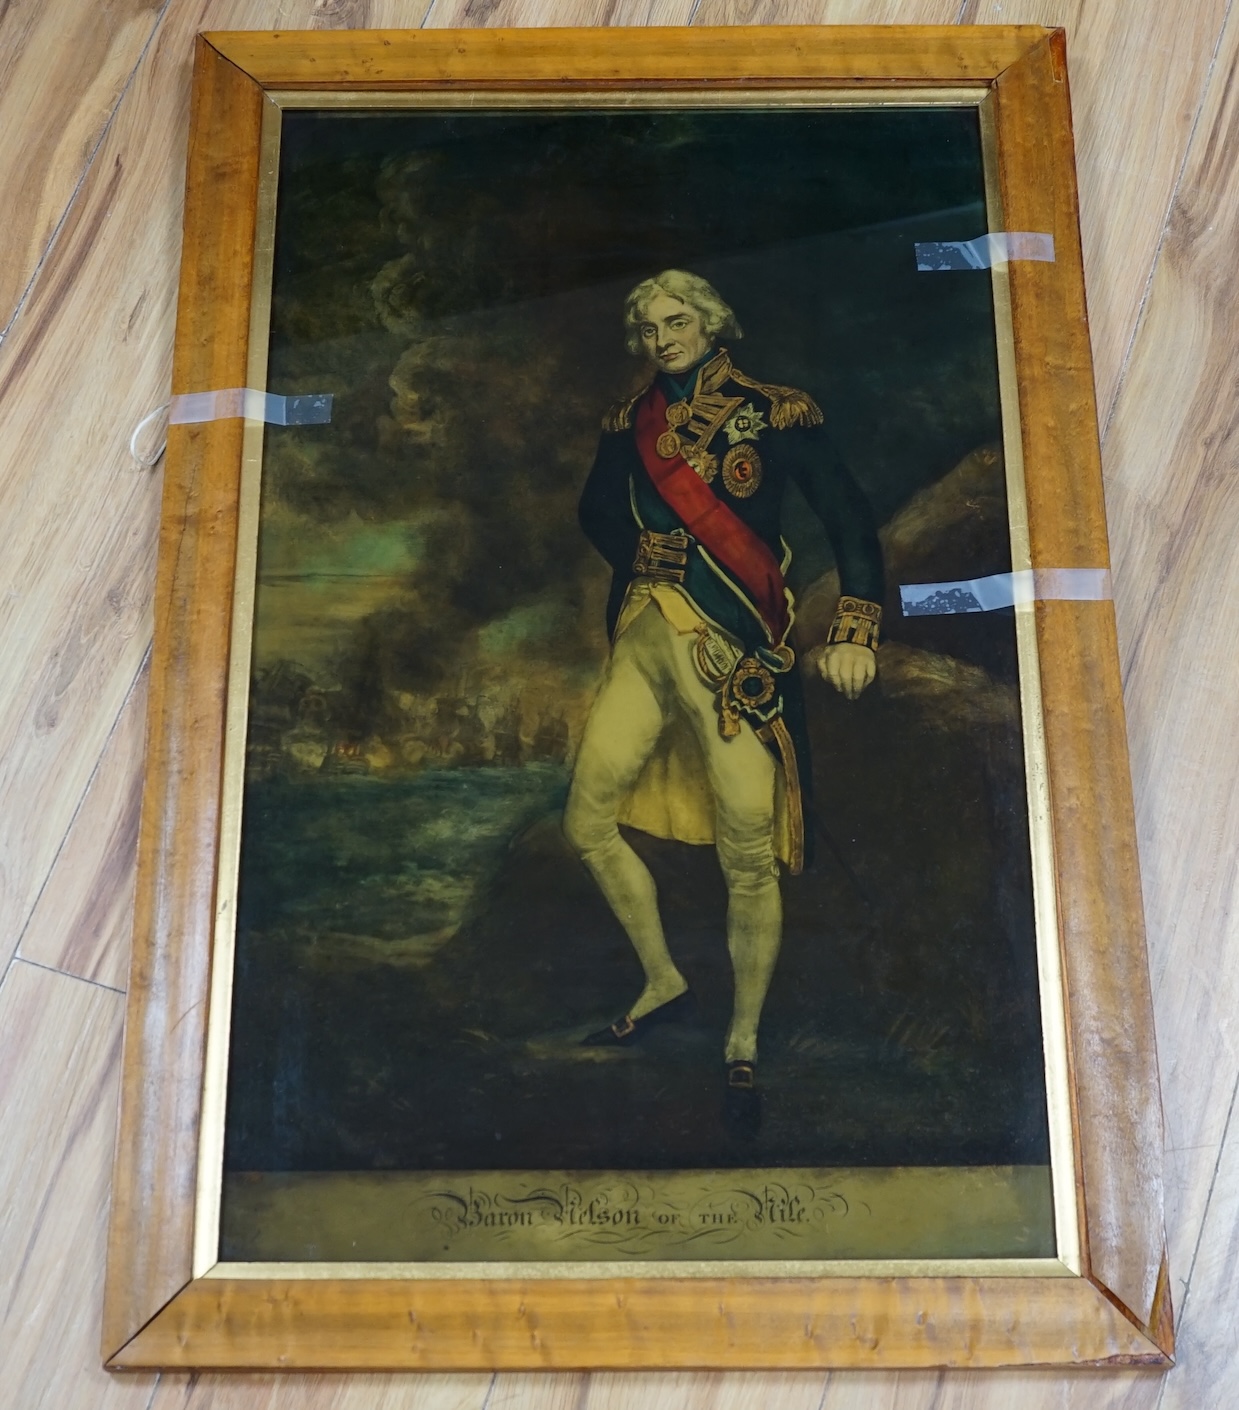 19th century, reverse glass painted print ‘Baron Nelson of the Nile’, 70 x 42cm. Condition - fair